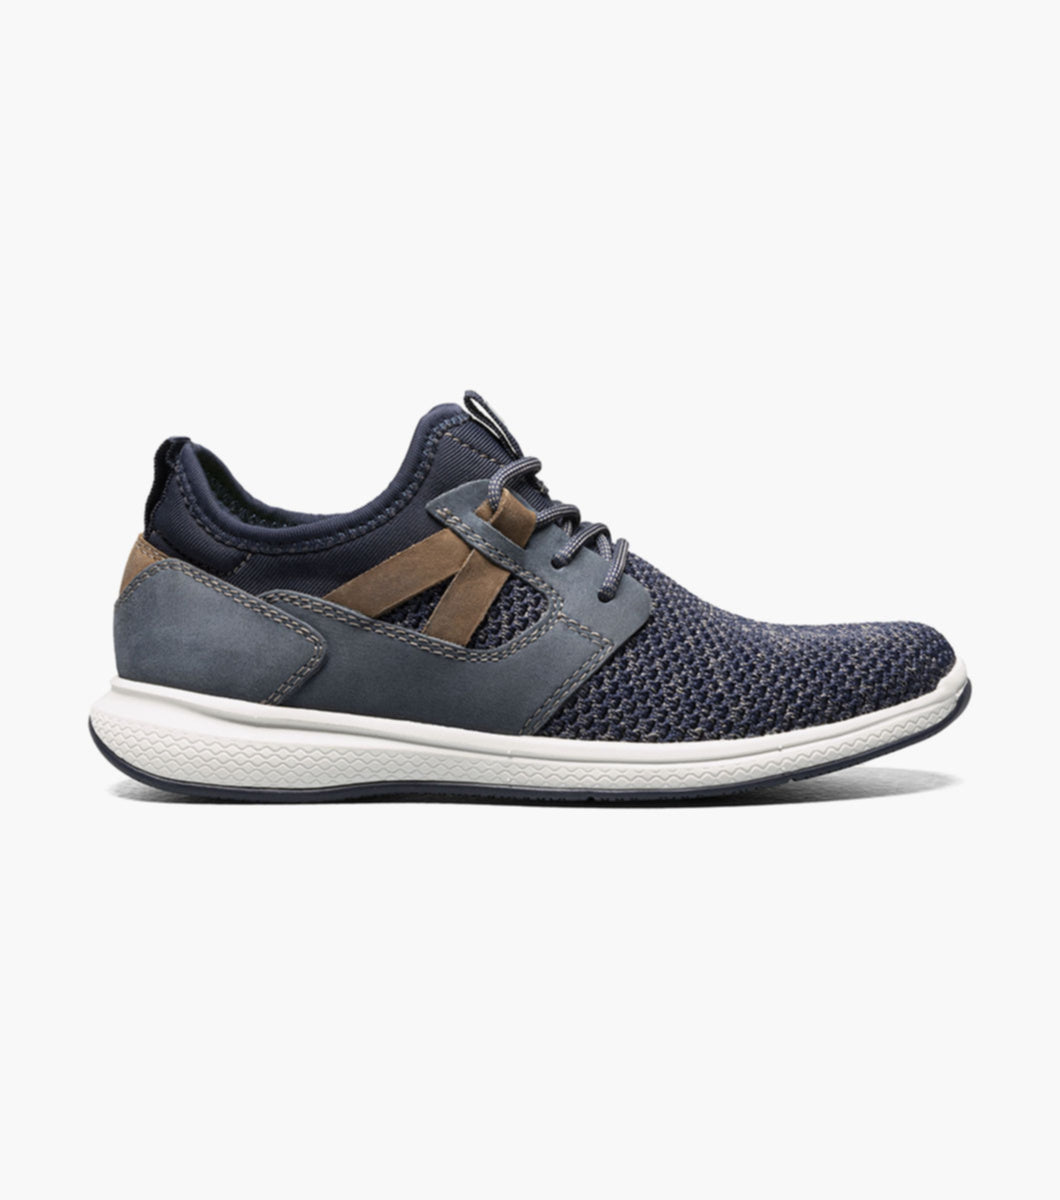 Step into a new world of style and comfort with the Florsheim Great Lakes Knit Plain Toe Sneaker, Jr. Featuring a hybrid sneaker design with an athletic-inspired sole, this is a shoe style he needs in his closet.